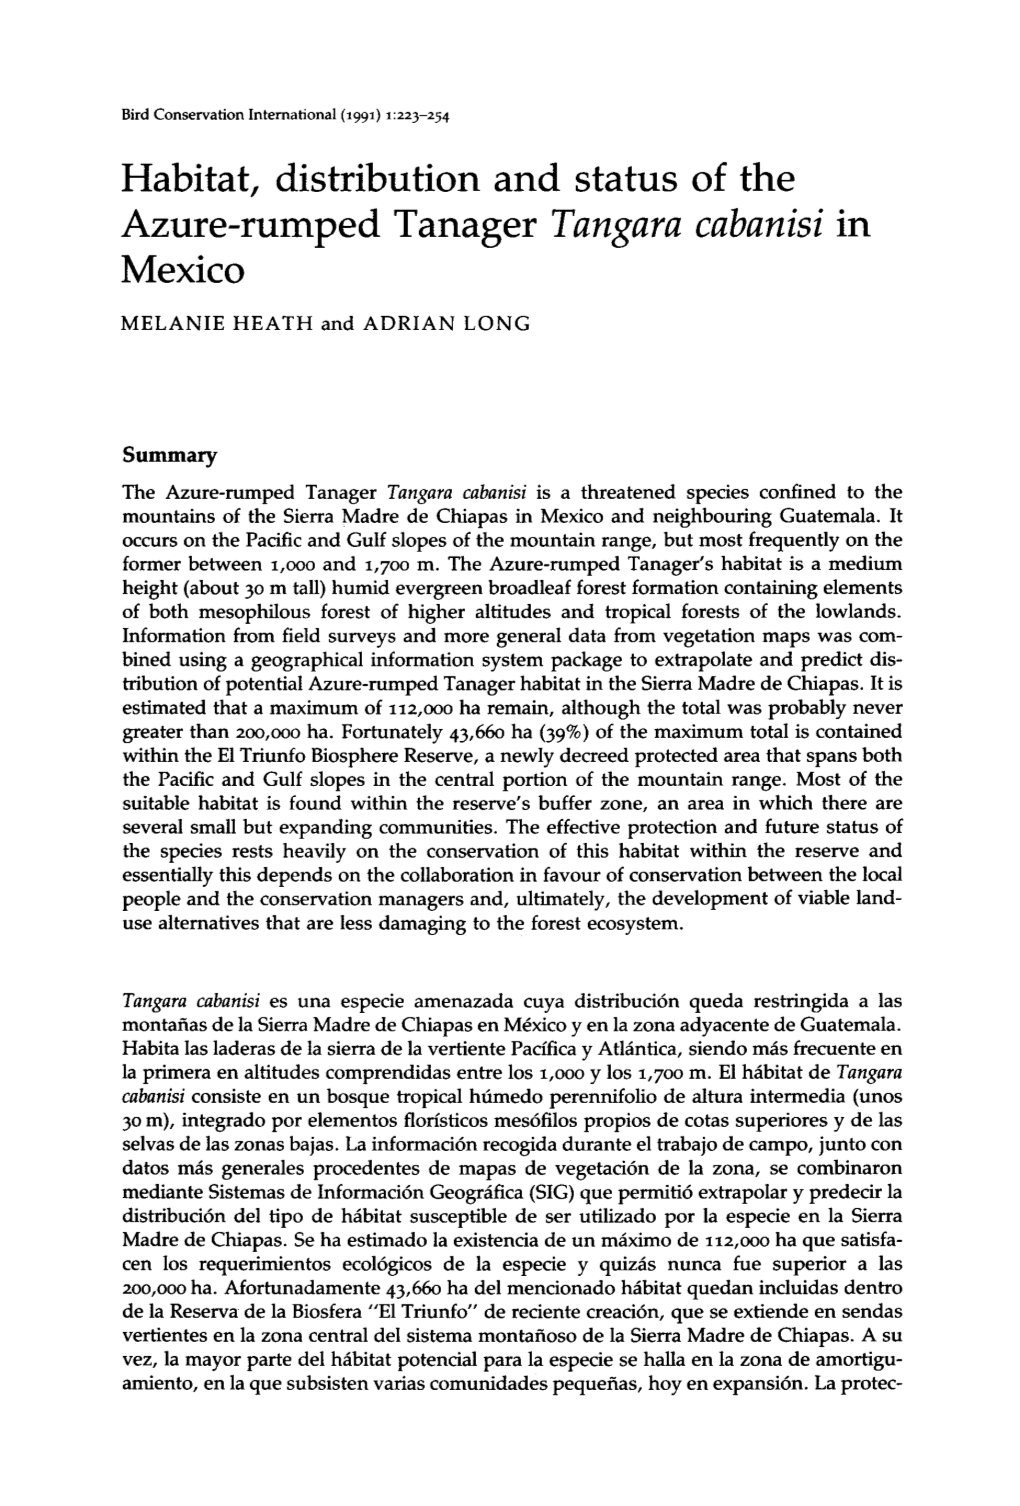 Habitat, Distribution and Status of the Azure-Rumped Tanager Tangara Cabanisi in Mexico